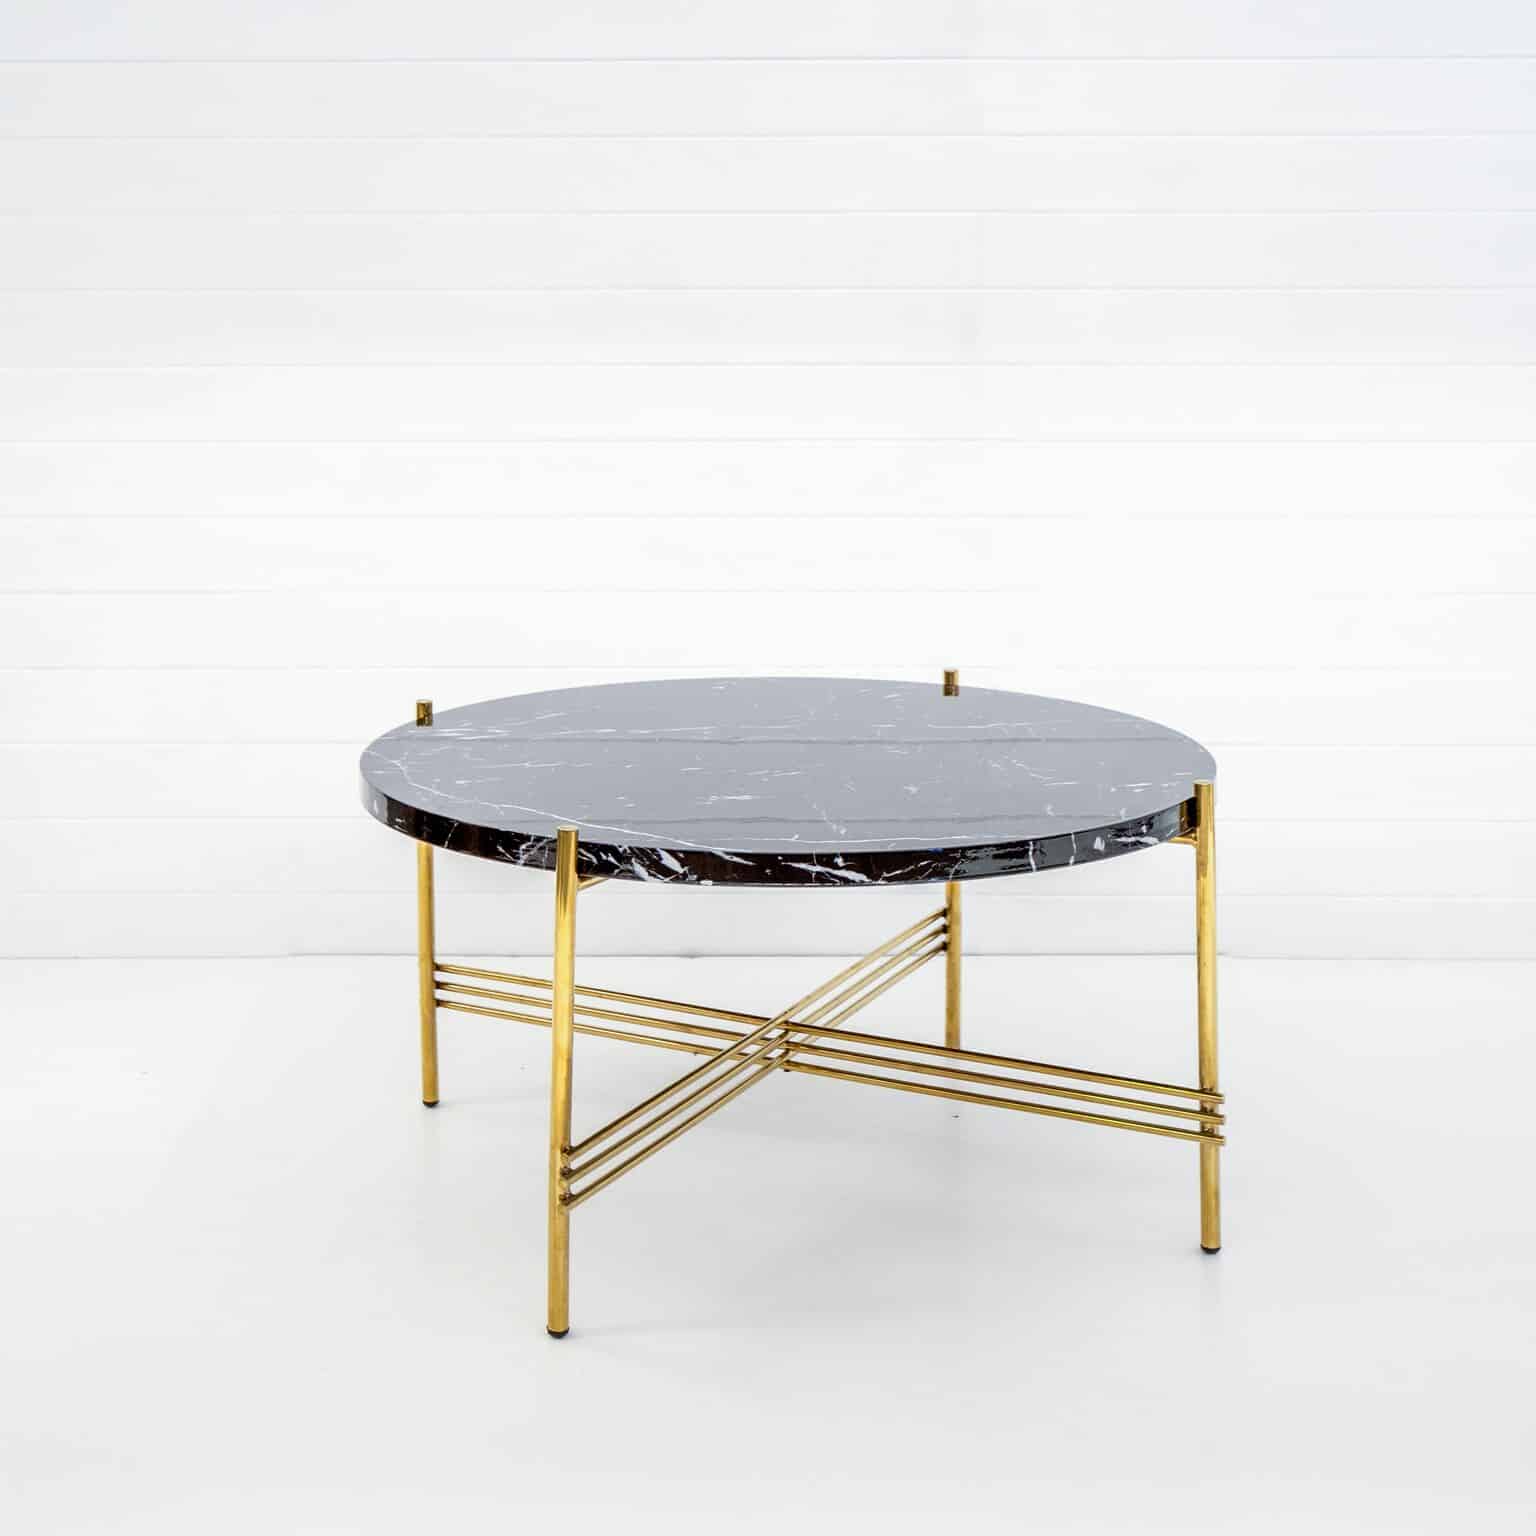 BLACKMARBLETOPONLY-Icelandicroundcoffeetable_preview.jpg